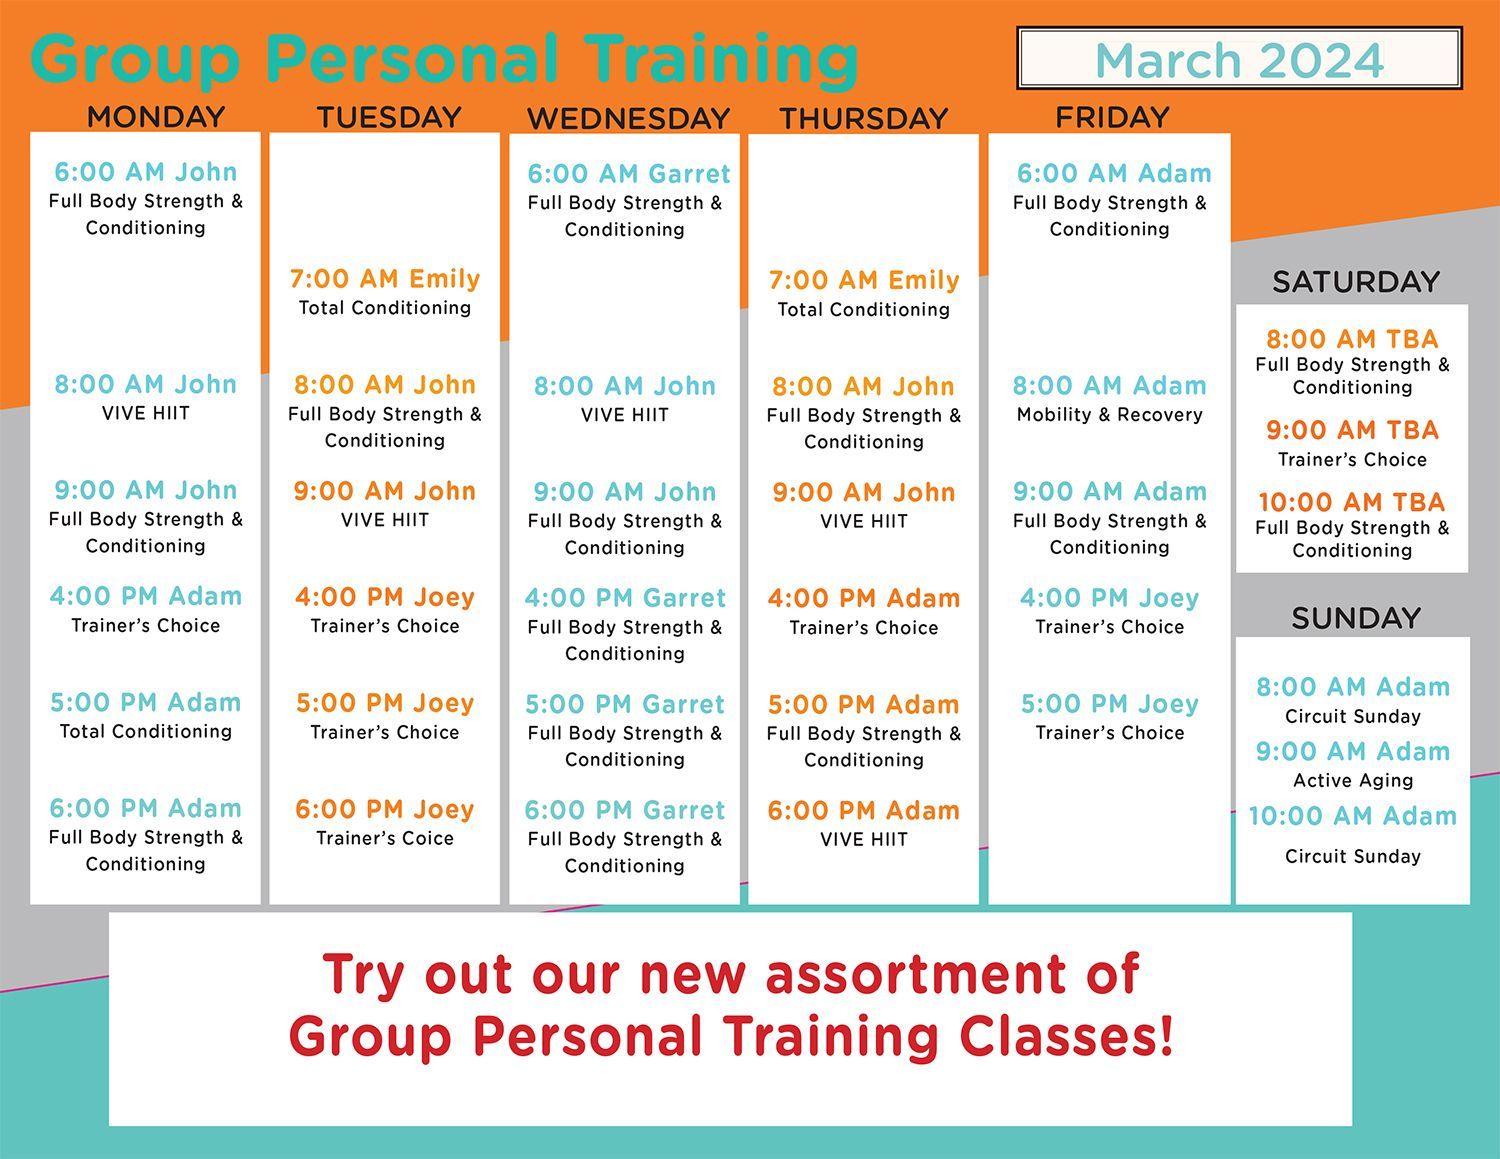 A group personal training schedule for march 2024